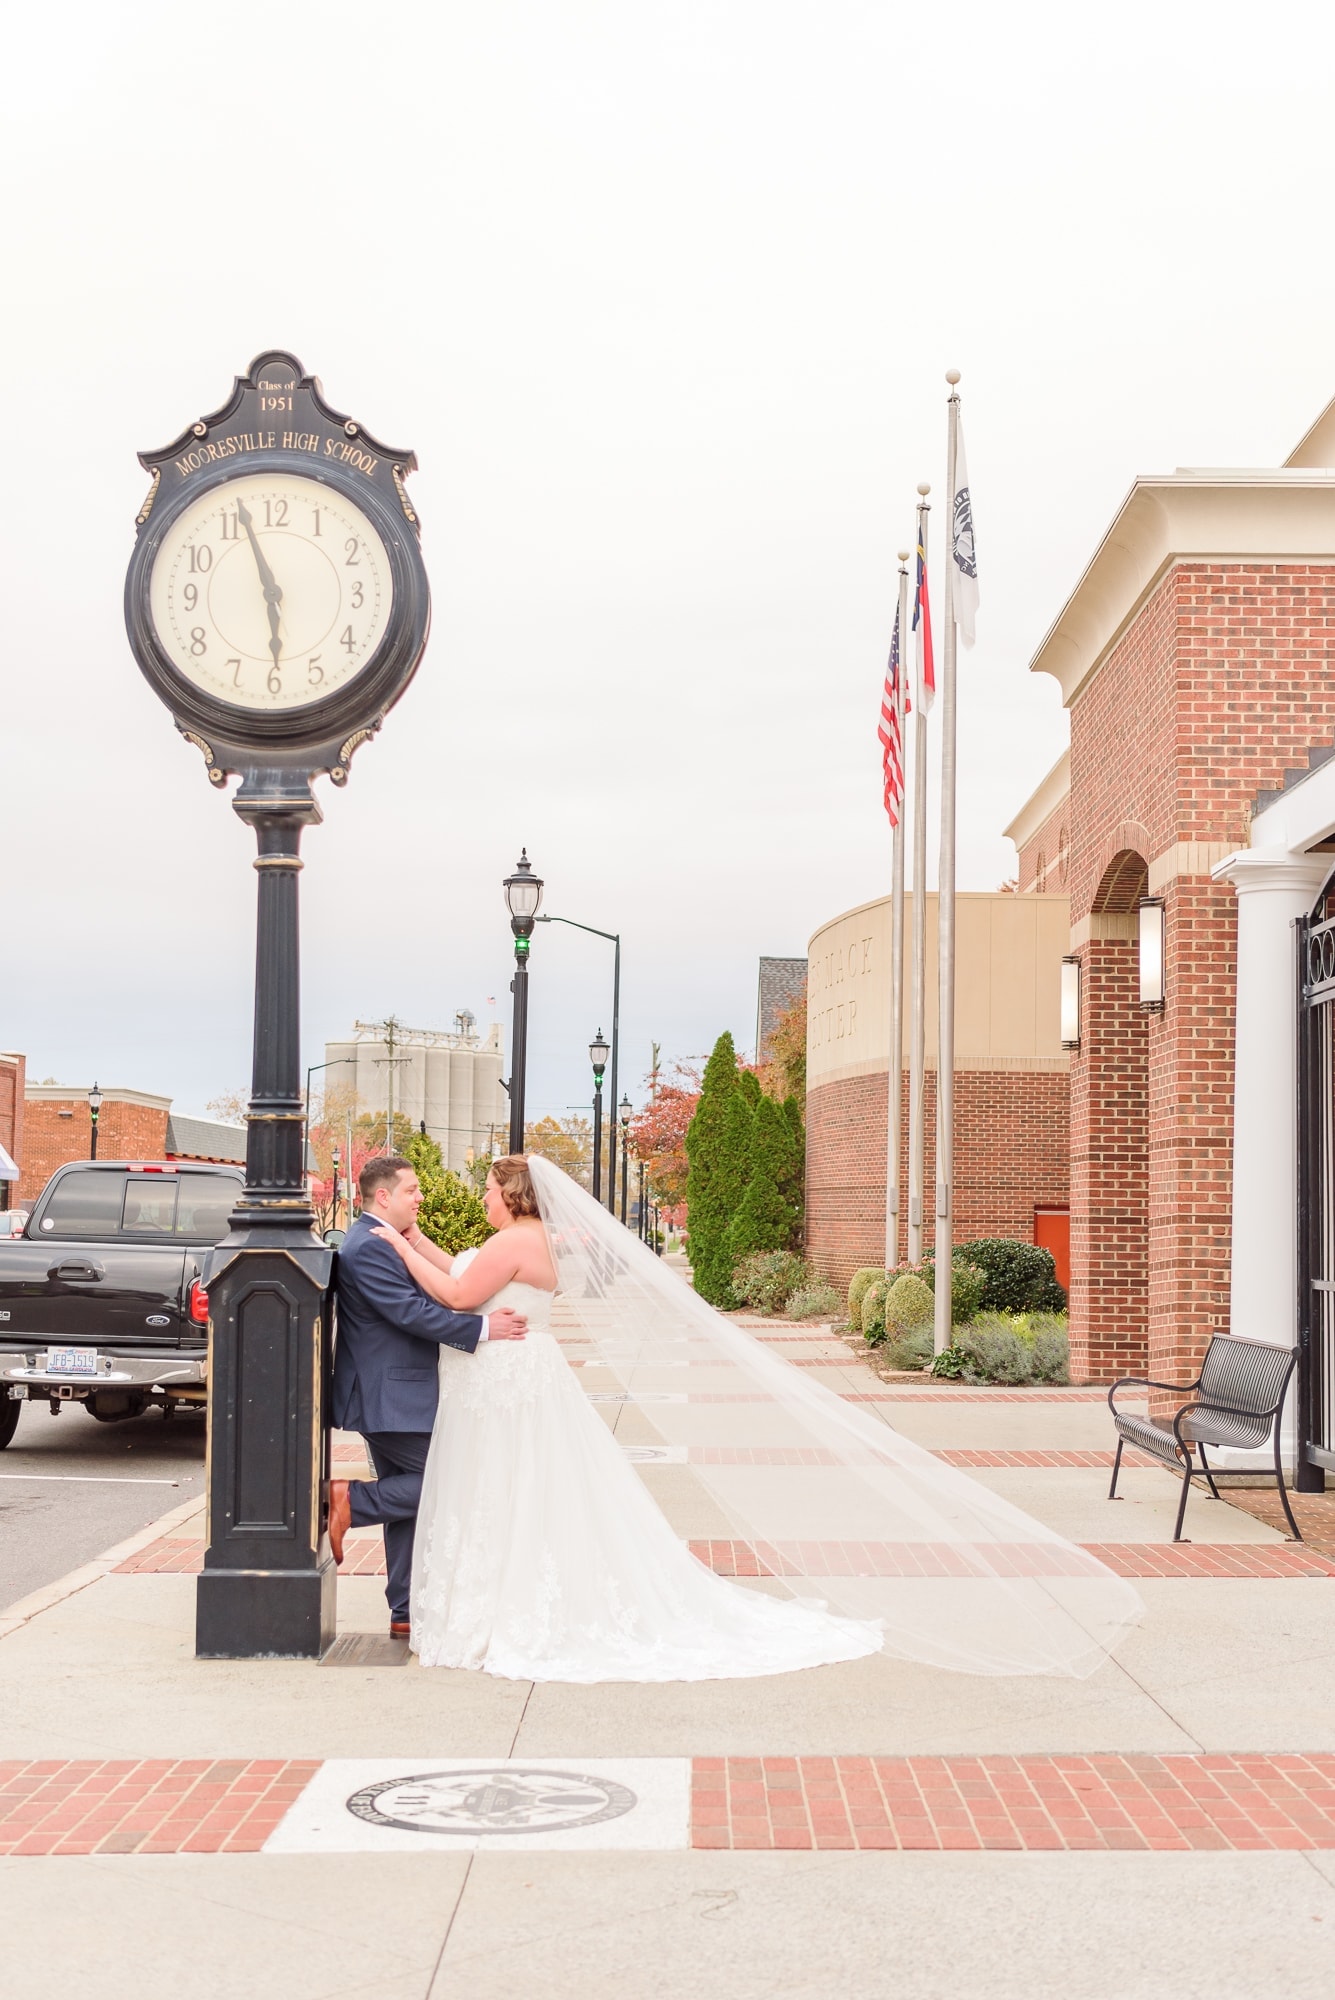 The bride and groom stand next to a striking clock on the street near the Charles Mack Citizen Center.